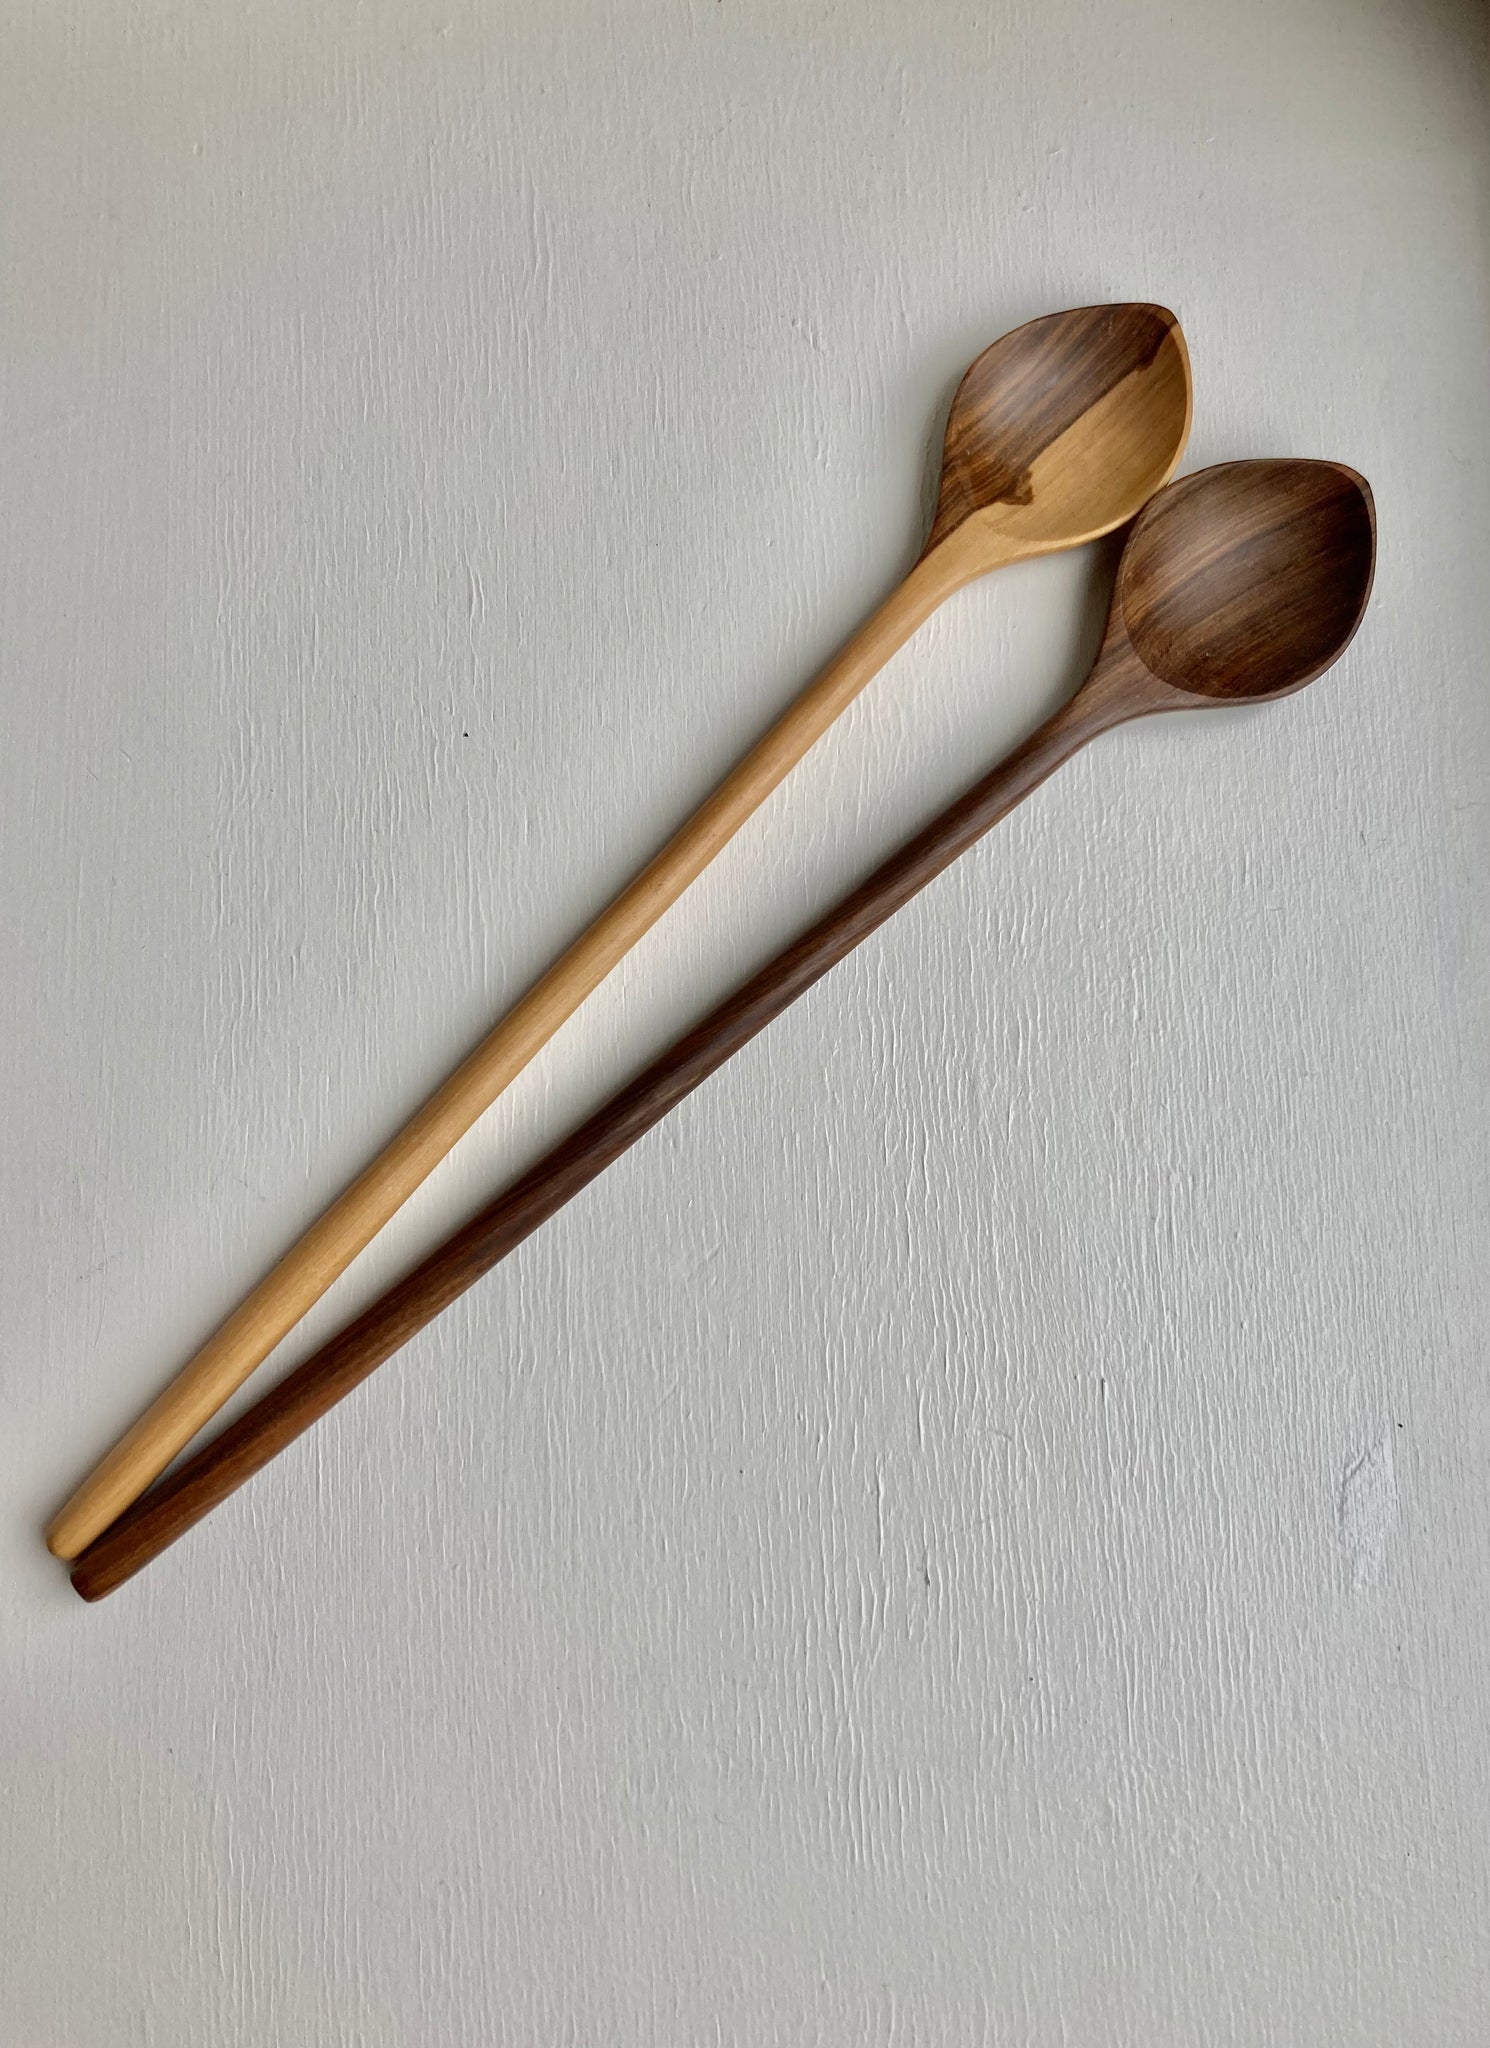 Spoon - Wooden Lage, hand-carved in Colombia